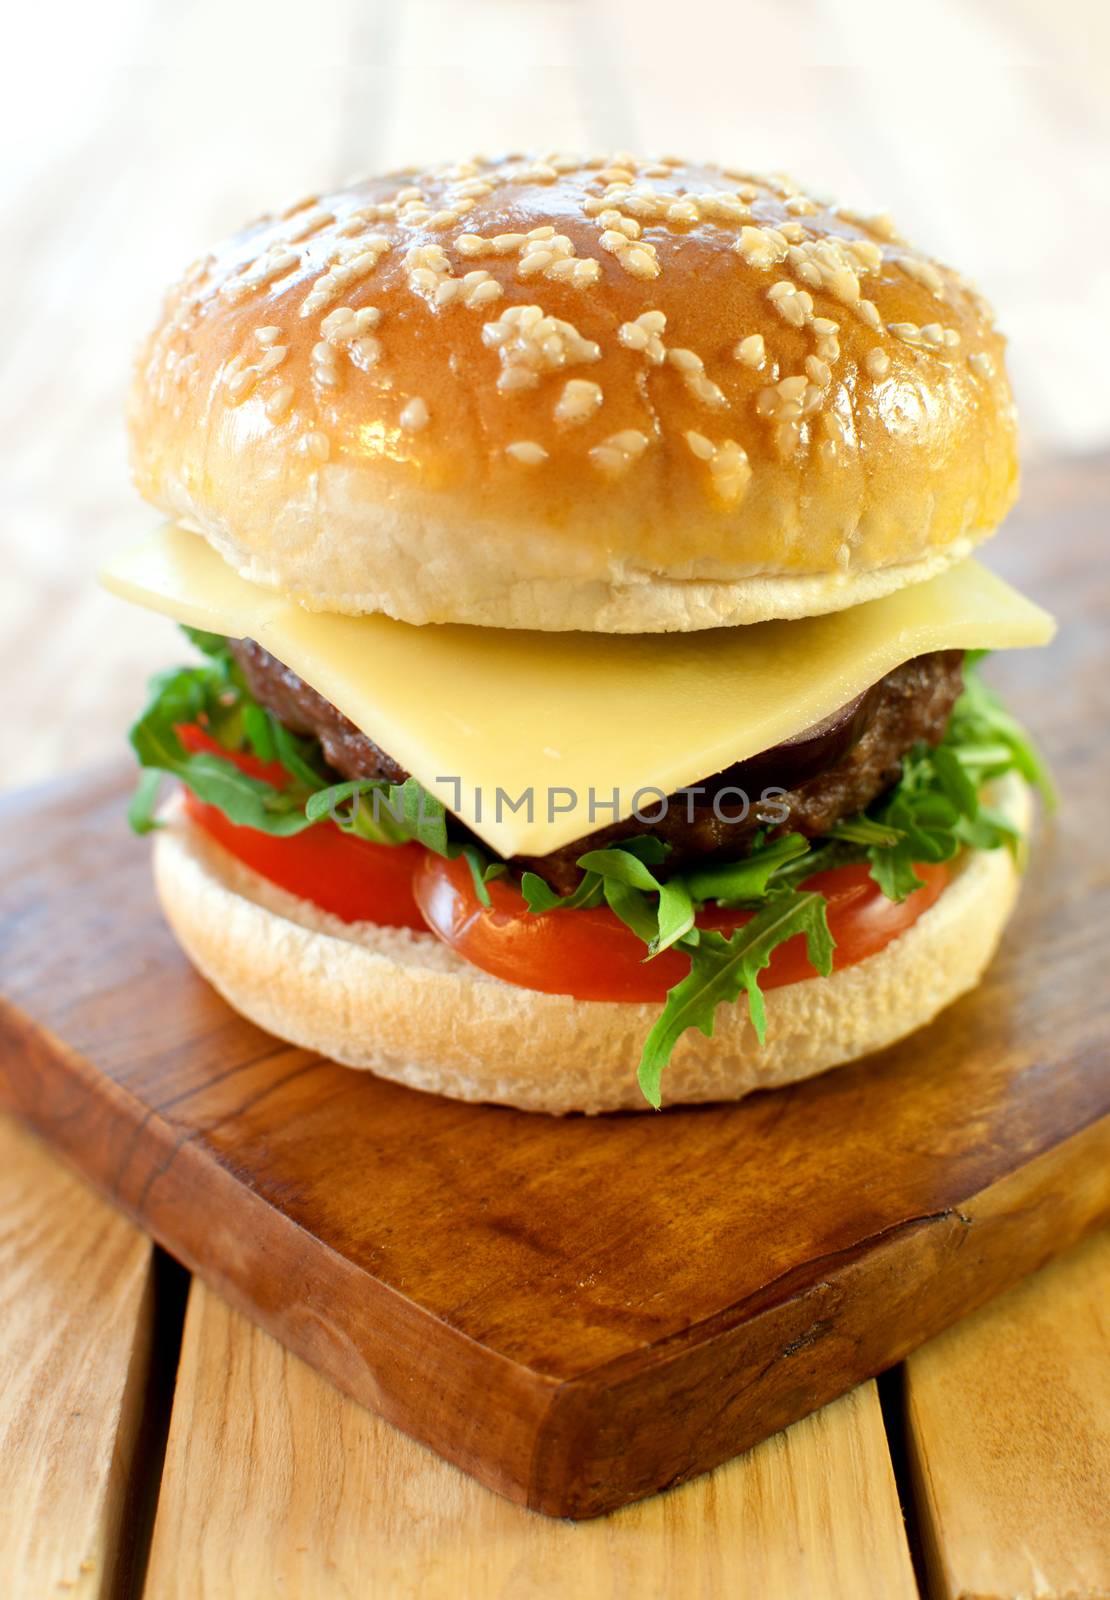 Hamburger with cheese and tomato filling on a cutting board